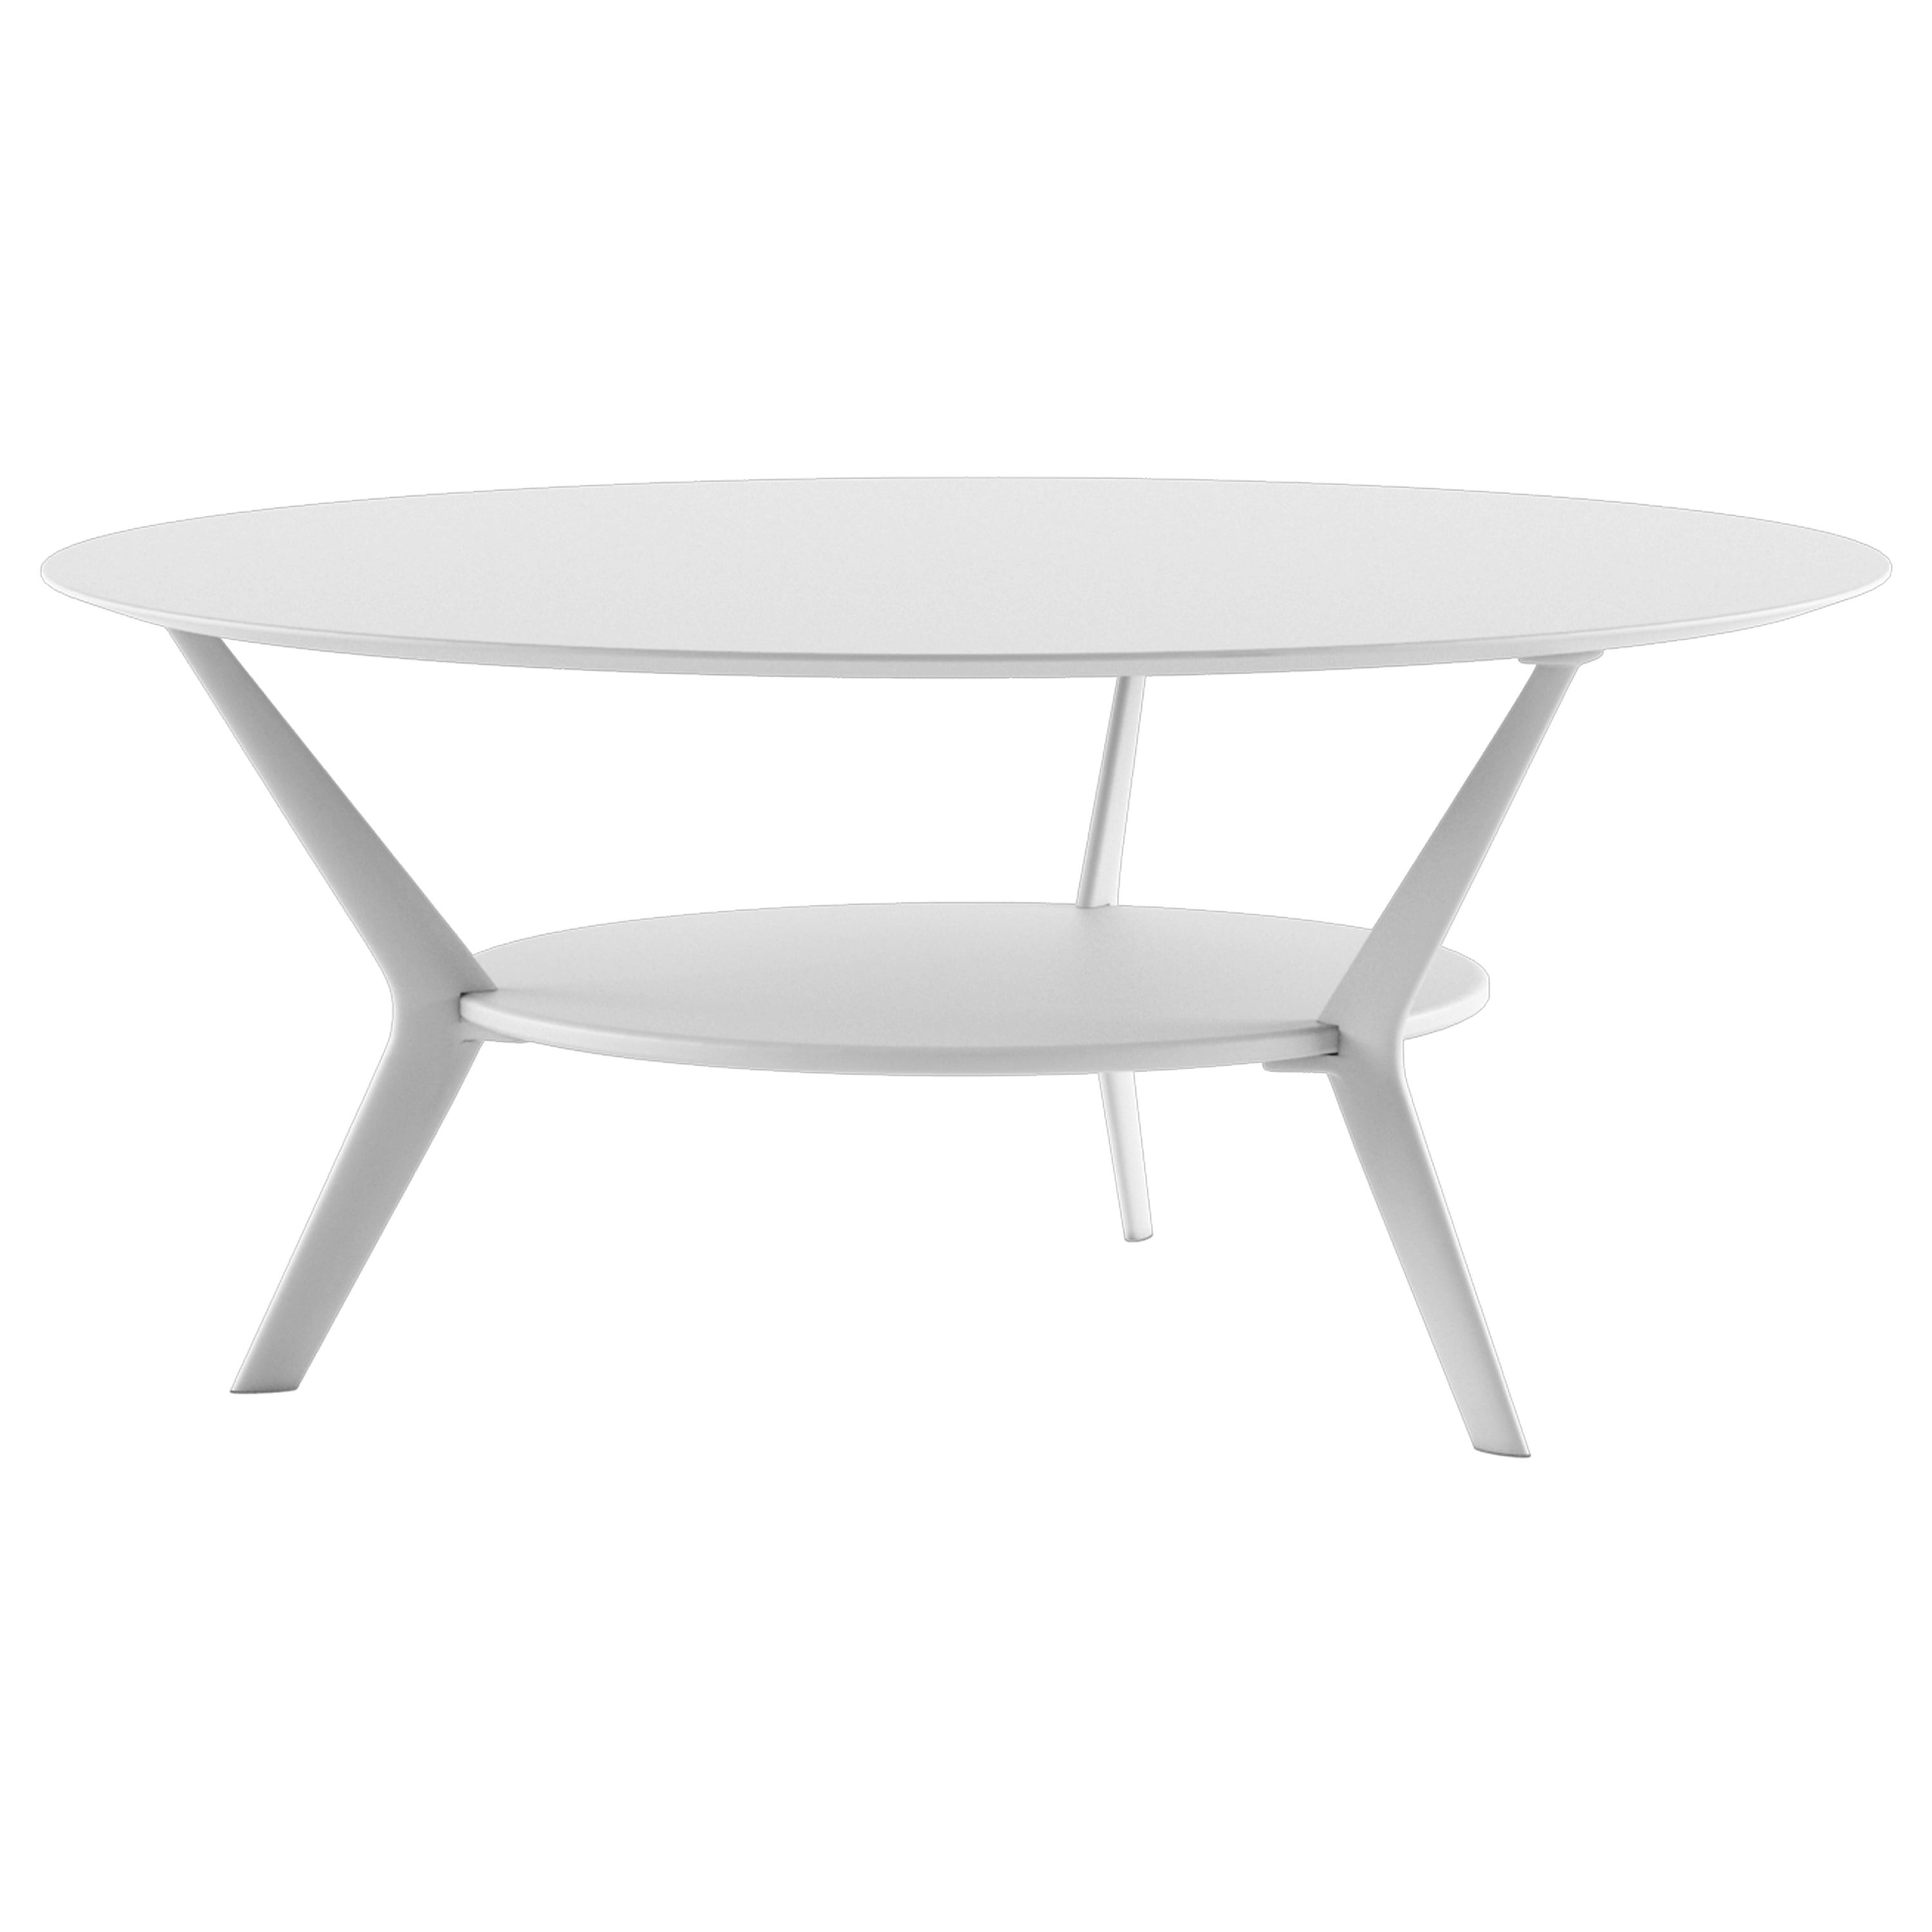 Alias B03 Biplane XS Ø80 Outdoor Table in White Top and Lacquered Frame For Sale